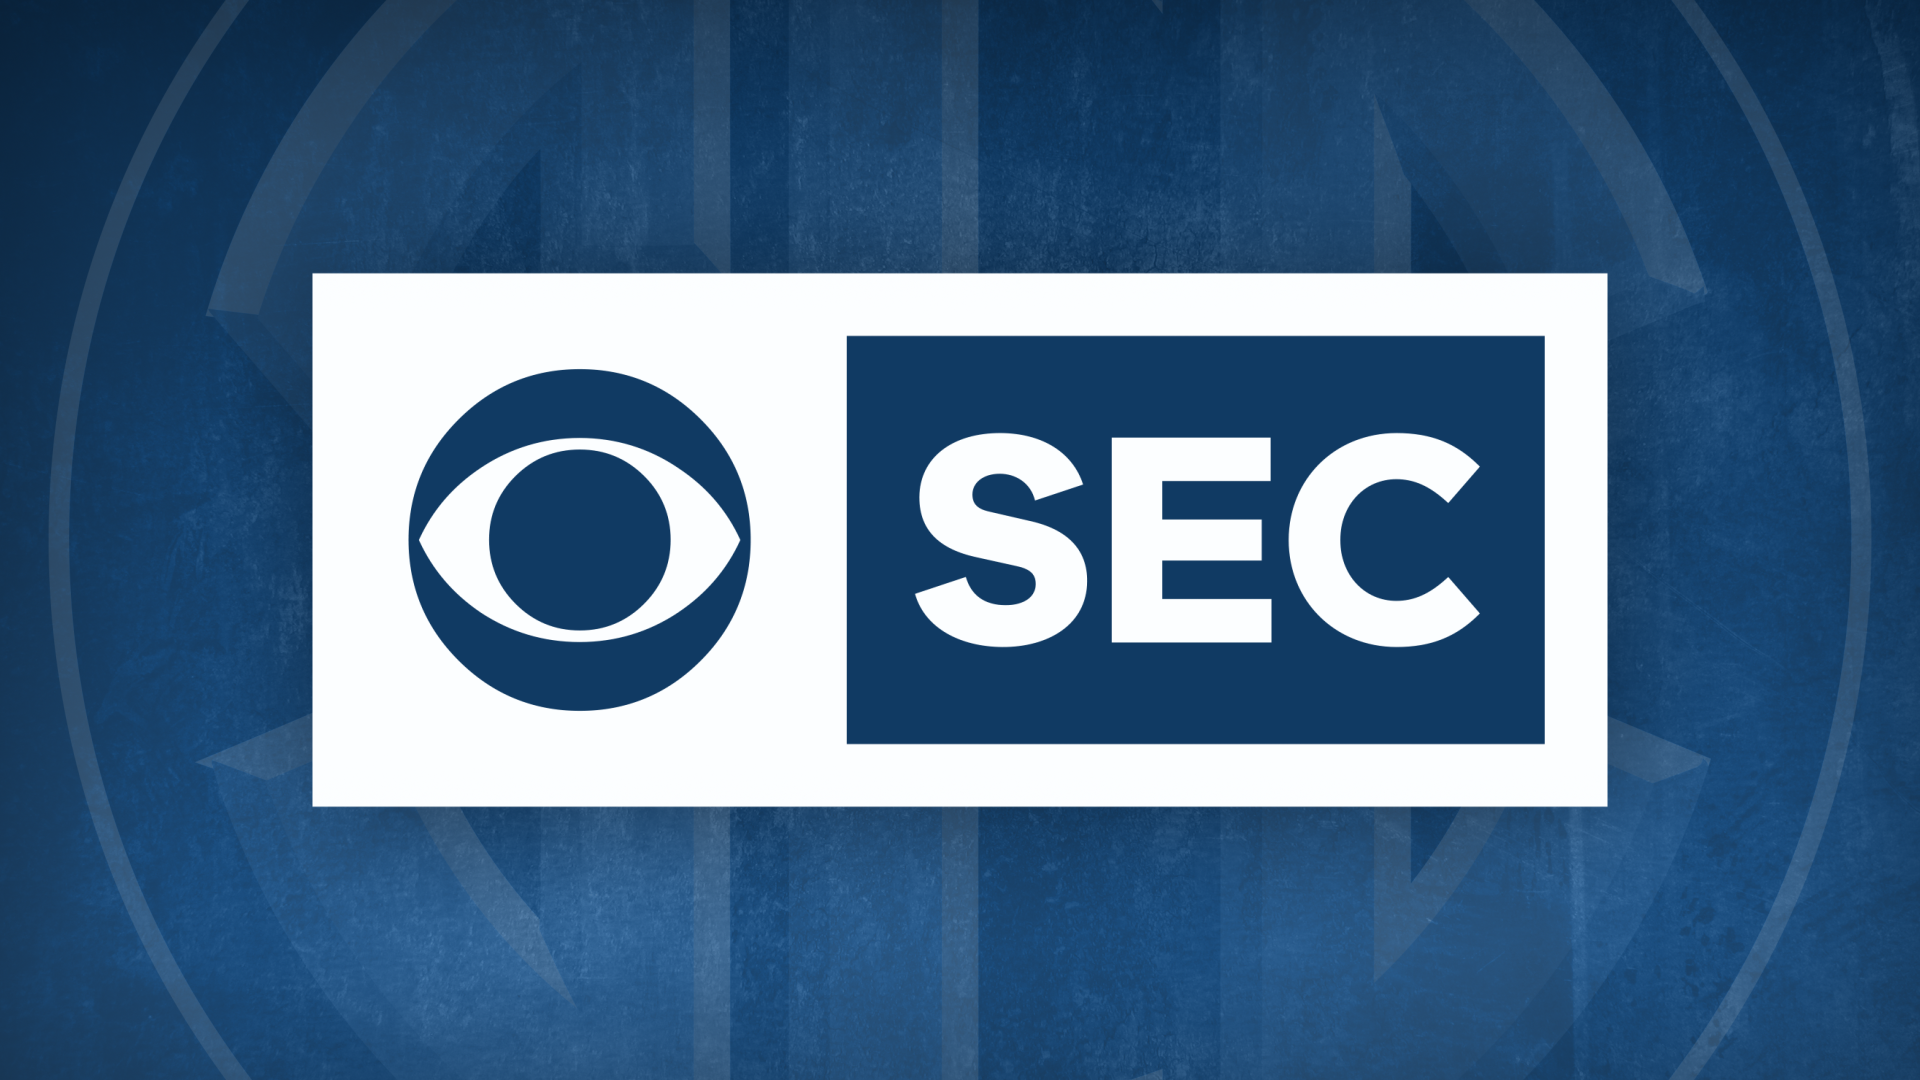 CBS Sports announces 2020 “SEC on CBS” broadcast schedule WNKY News